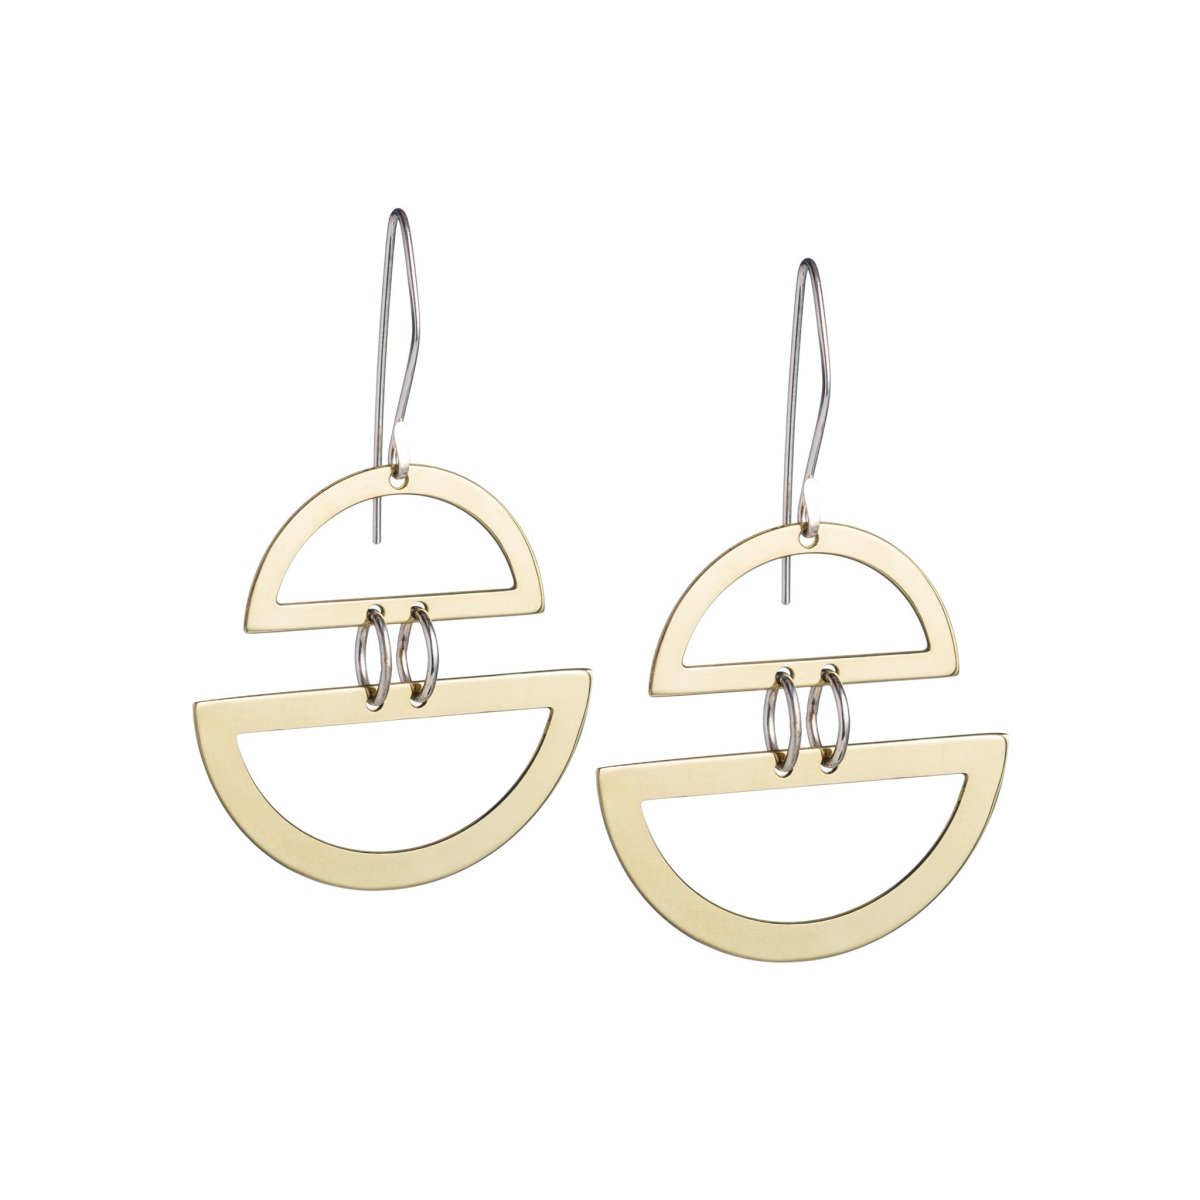 Modern, lightweight, polished brass semi-circle shapes, joined in the middle by two sterling silver rings, and dangling from hand-shaped sterling silver earring wires. Hand-crafted in Portland, Oregon.